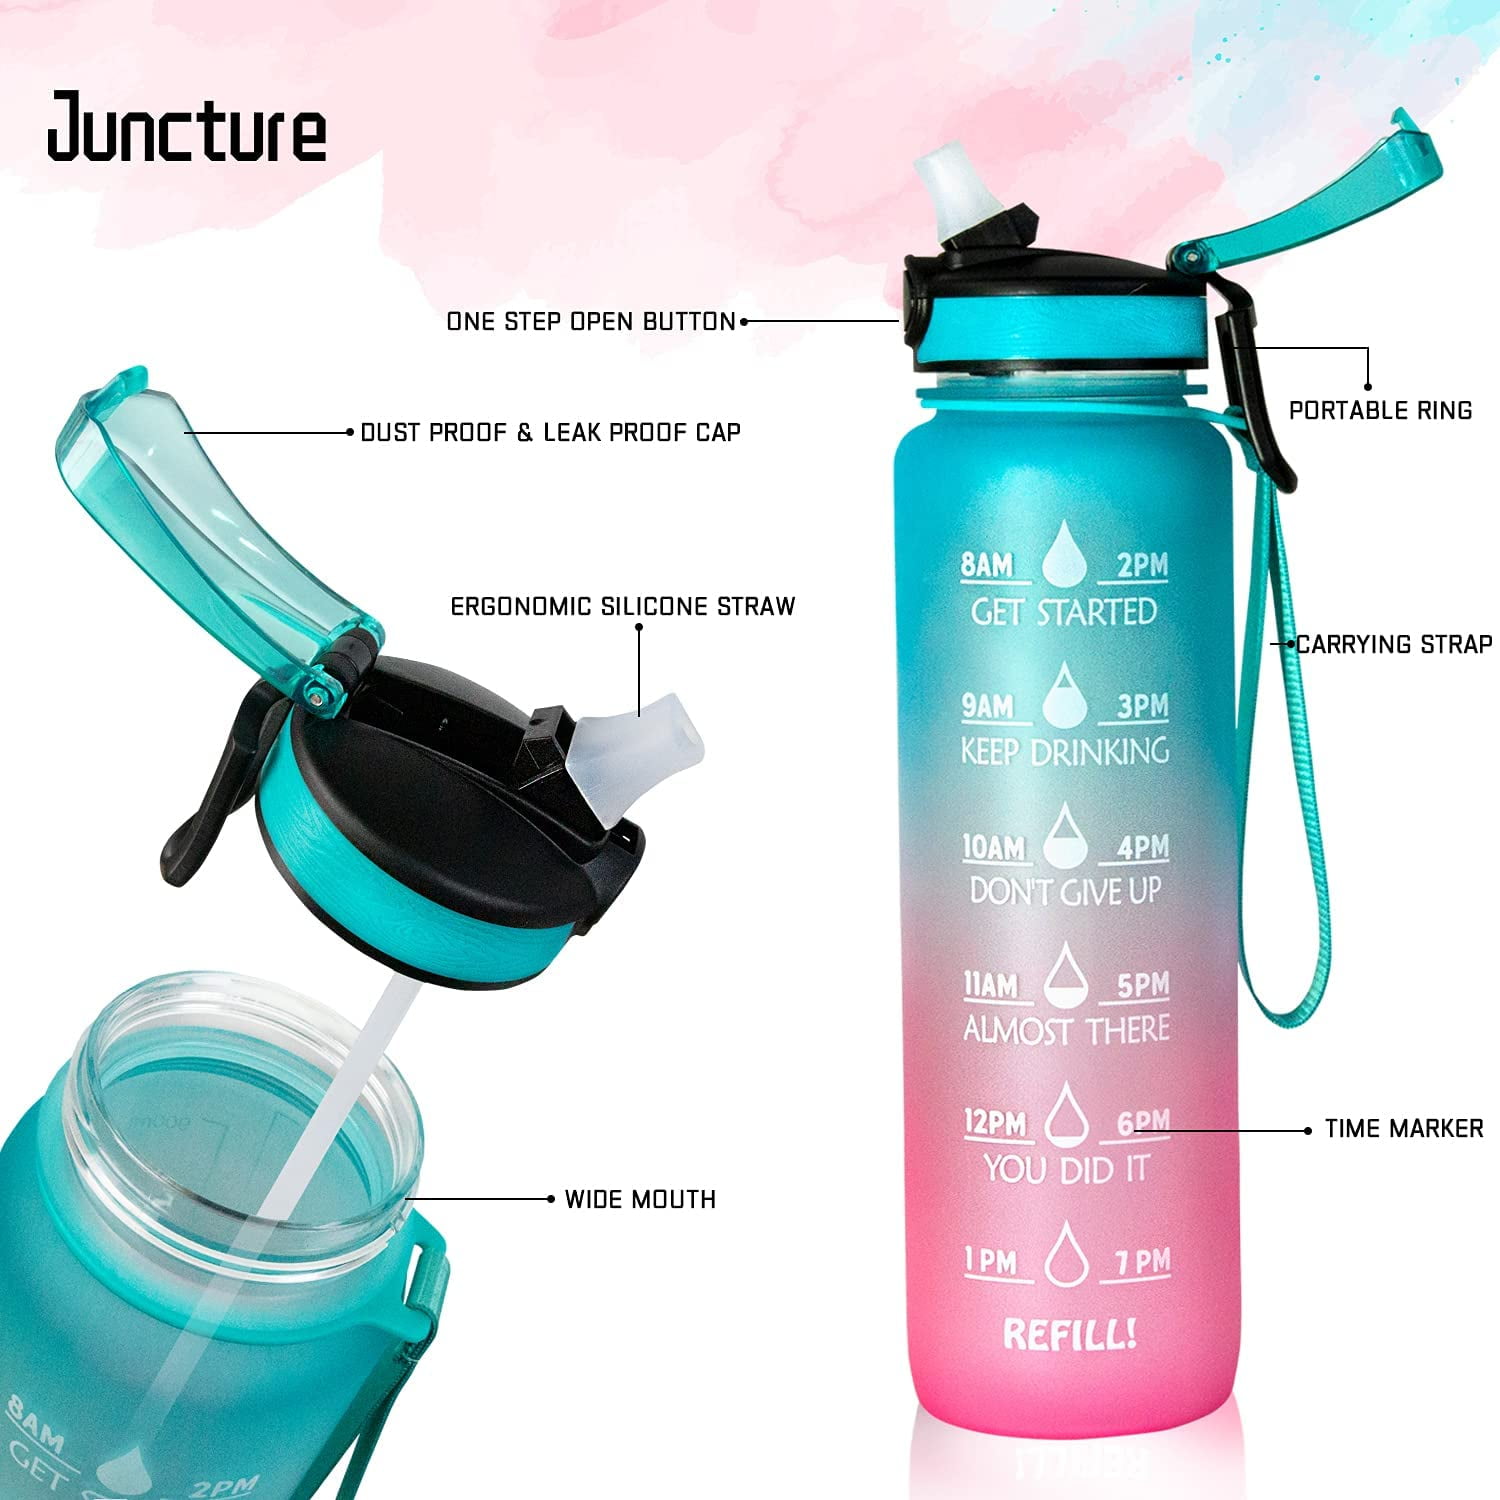 Don't Sweat 24 hour Hot/Cold Water Bottle with Sport Cap – Don't